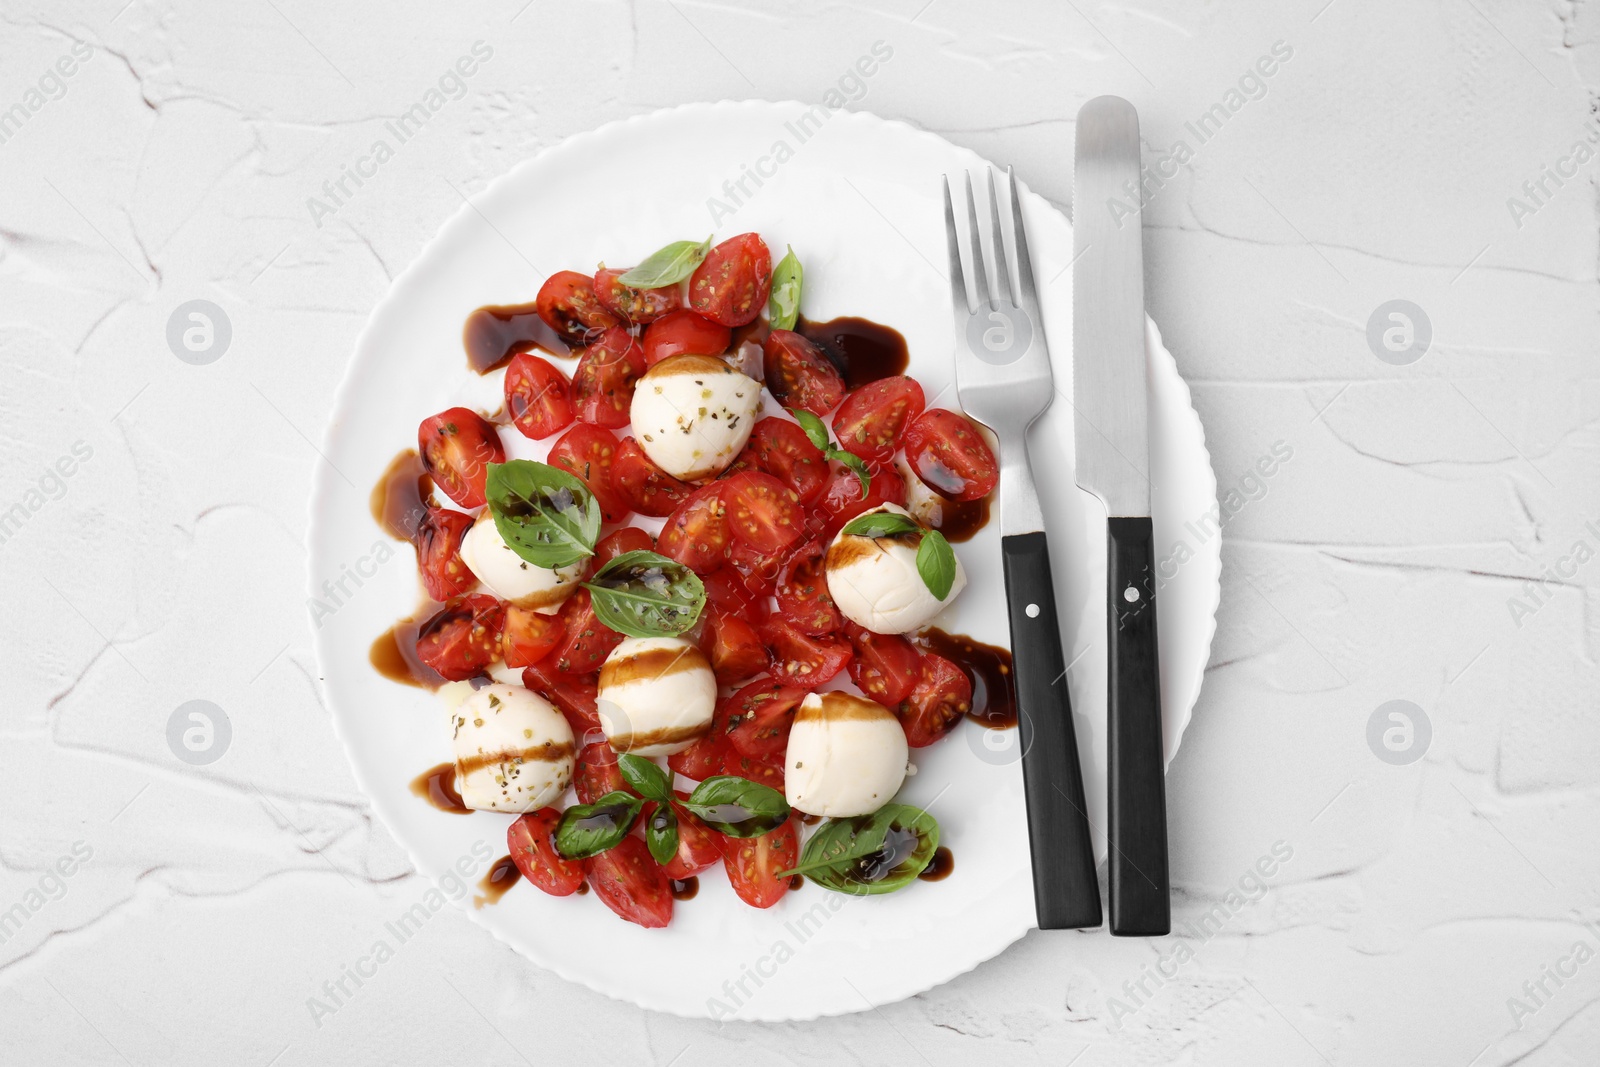 Photo of Tasty salad Caprese with tomatoes, mozzarella balls, basil and cutlery on white textured table, top view